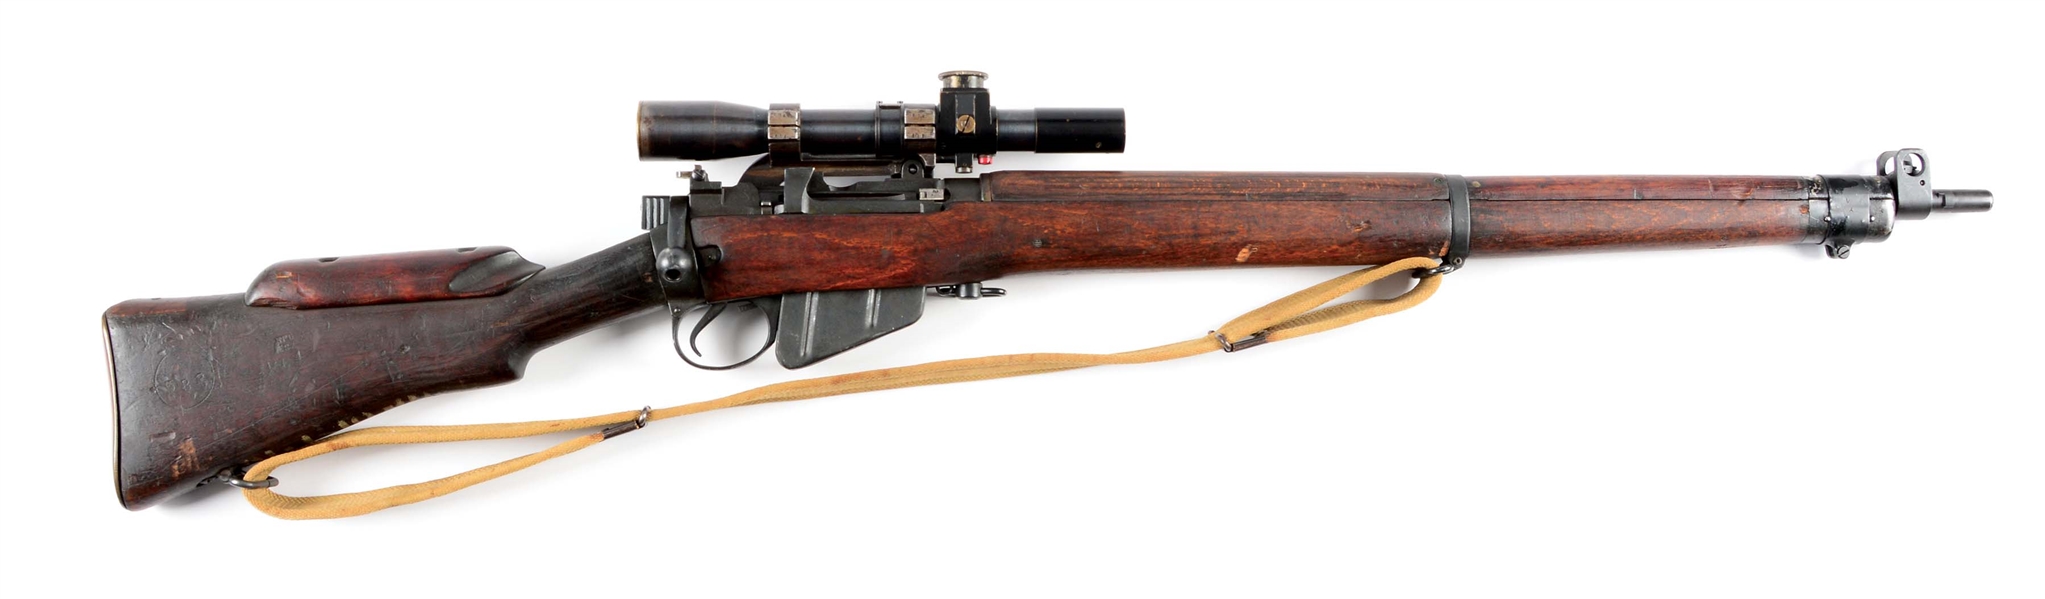 (C) SCARCE WWII BSA SHIRLEY BRITISH ENFIELD NO. 4 MK I (TR) 1944 SNIPER RIFLE WITH SCOPE.